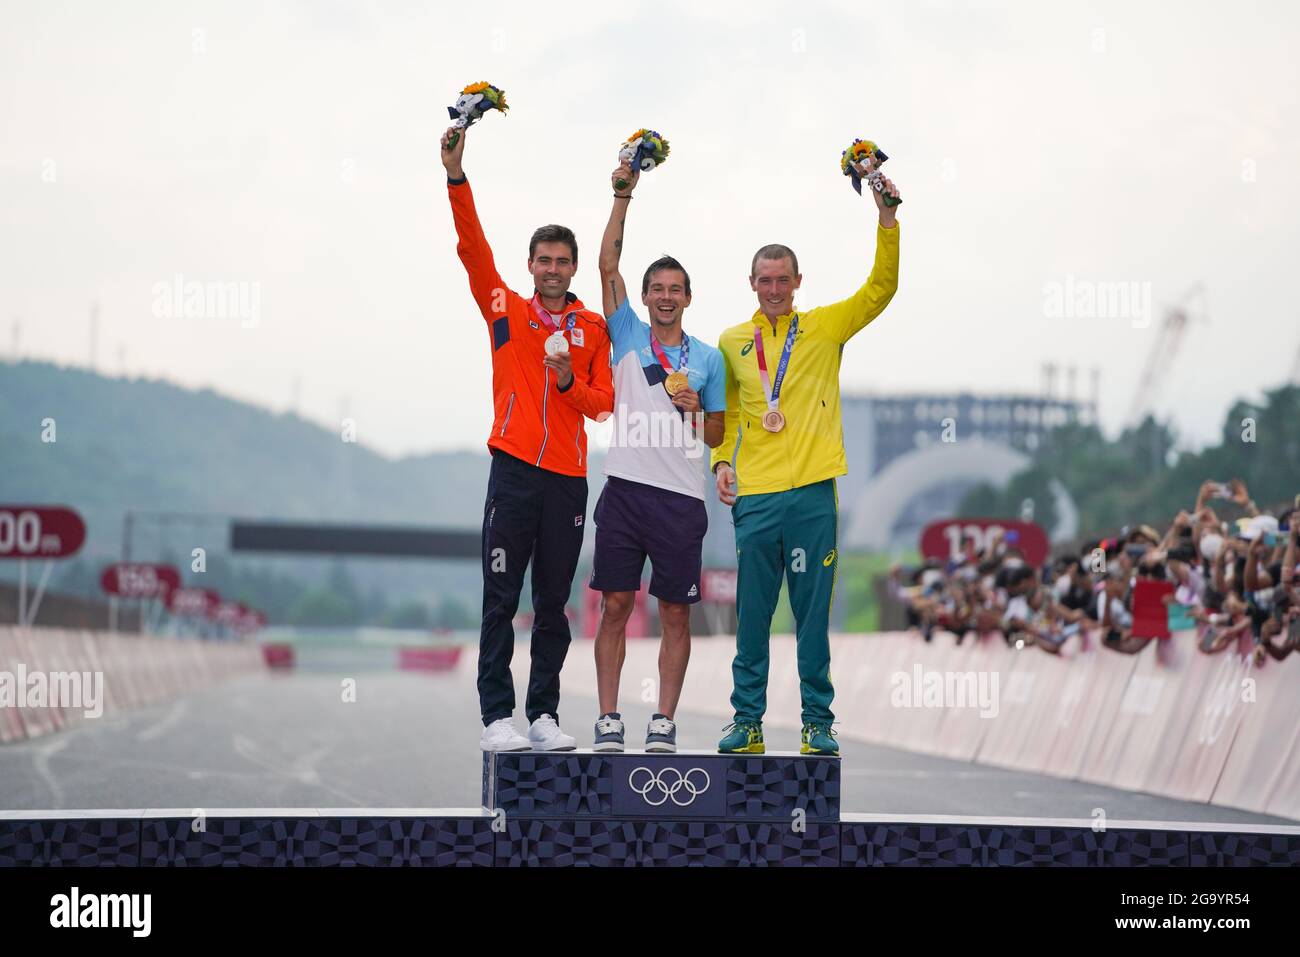 Shizuoka, Japan. 28th July, 2021. (L-R) DUMOULIN Tom (NED) - Silver medal, ROGLIC Primoz (SLO) - Gold medal, DENNIS Rohan (AUS) - Bronze medal Cycling : Men's Individual Time Trial medal ceremony during the Tokyo 2020 Olympic Games at the Fuji International Speedway in Shizuoka, Japan . Credit: Shutaro Mochizuki/AFLO SPORT/Alamy Live News Stock Photo